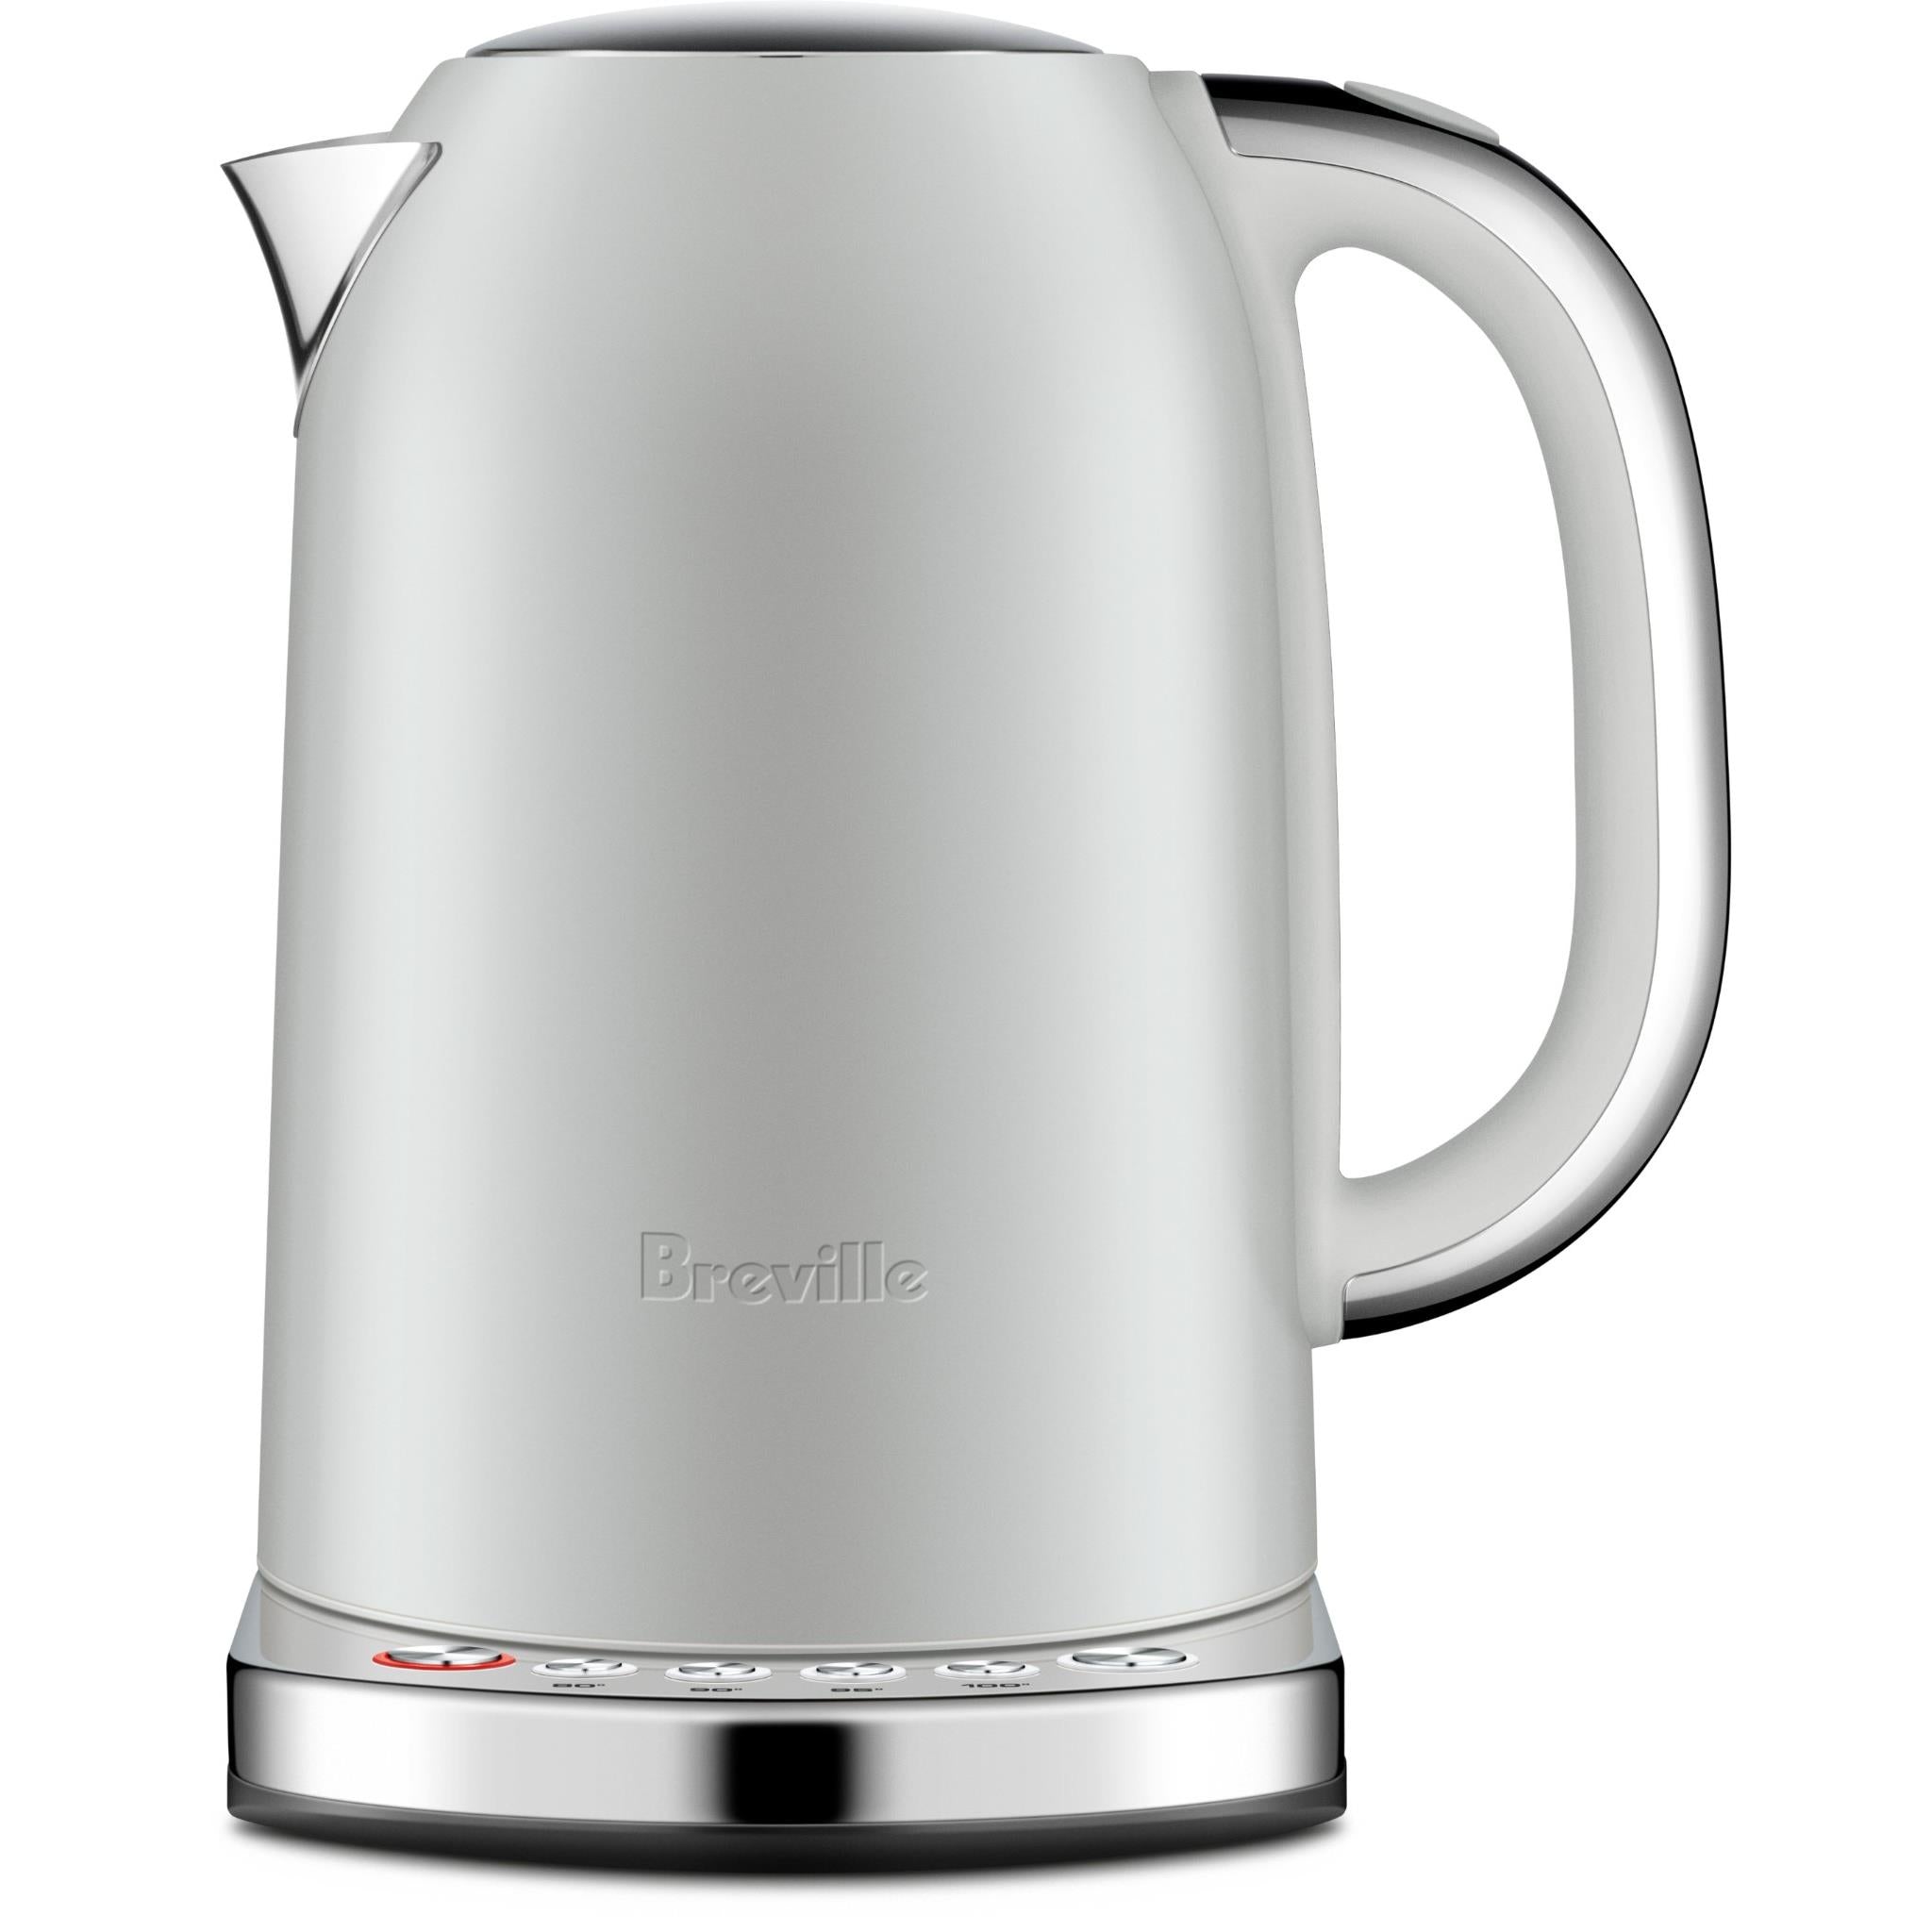 Govee Smart Kettle review: a clunky, yet clever way to make the perfect brew